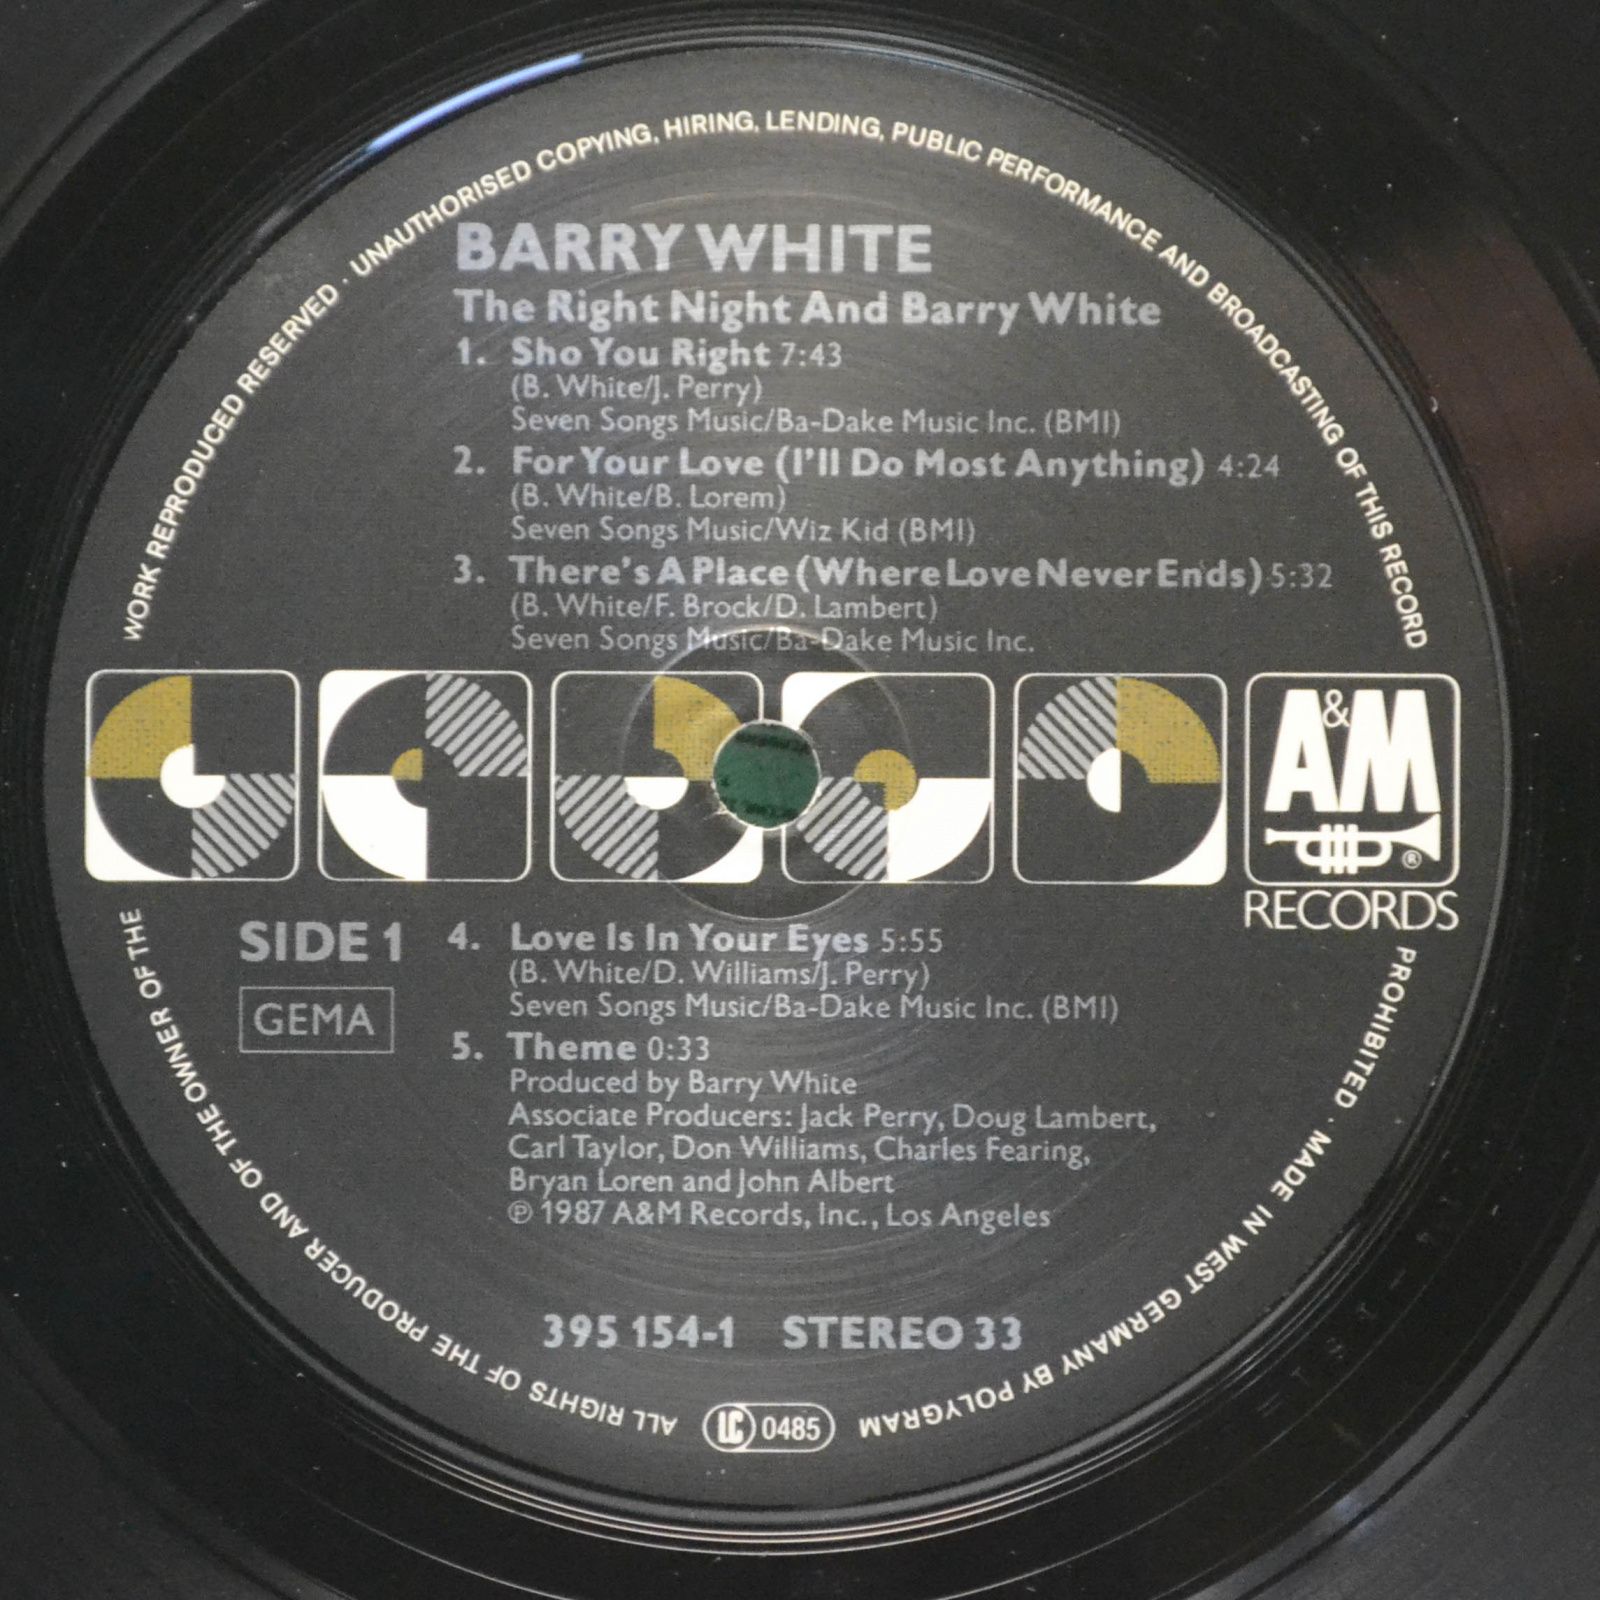 Barry White — The Right Night & Barry White, 1987